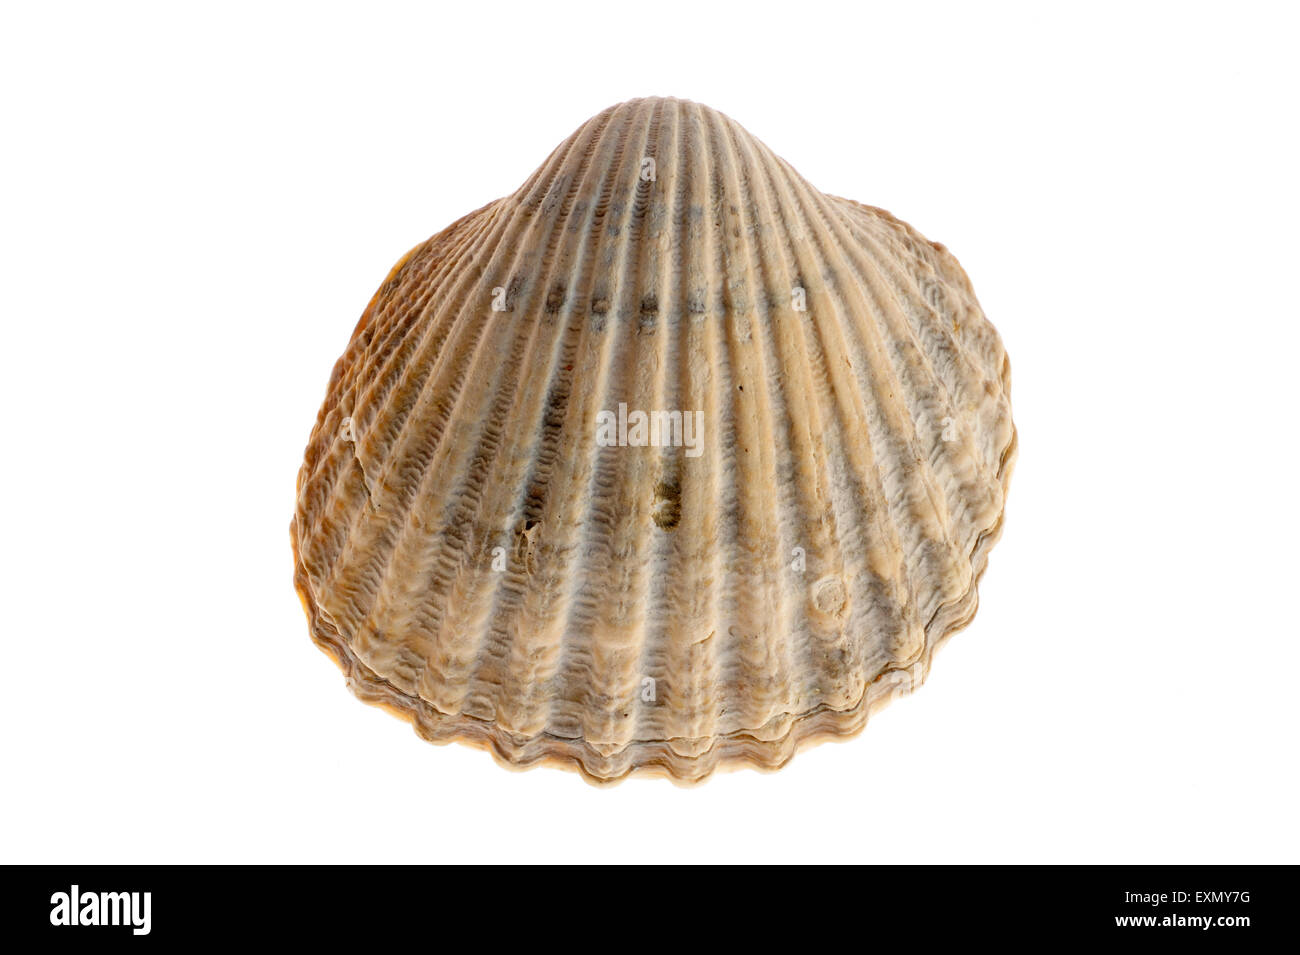 Poorly ribbed cockle (Acanthocardia paucicostata) shell on white background Stock Photo